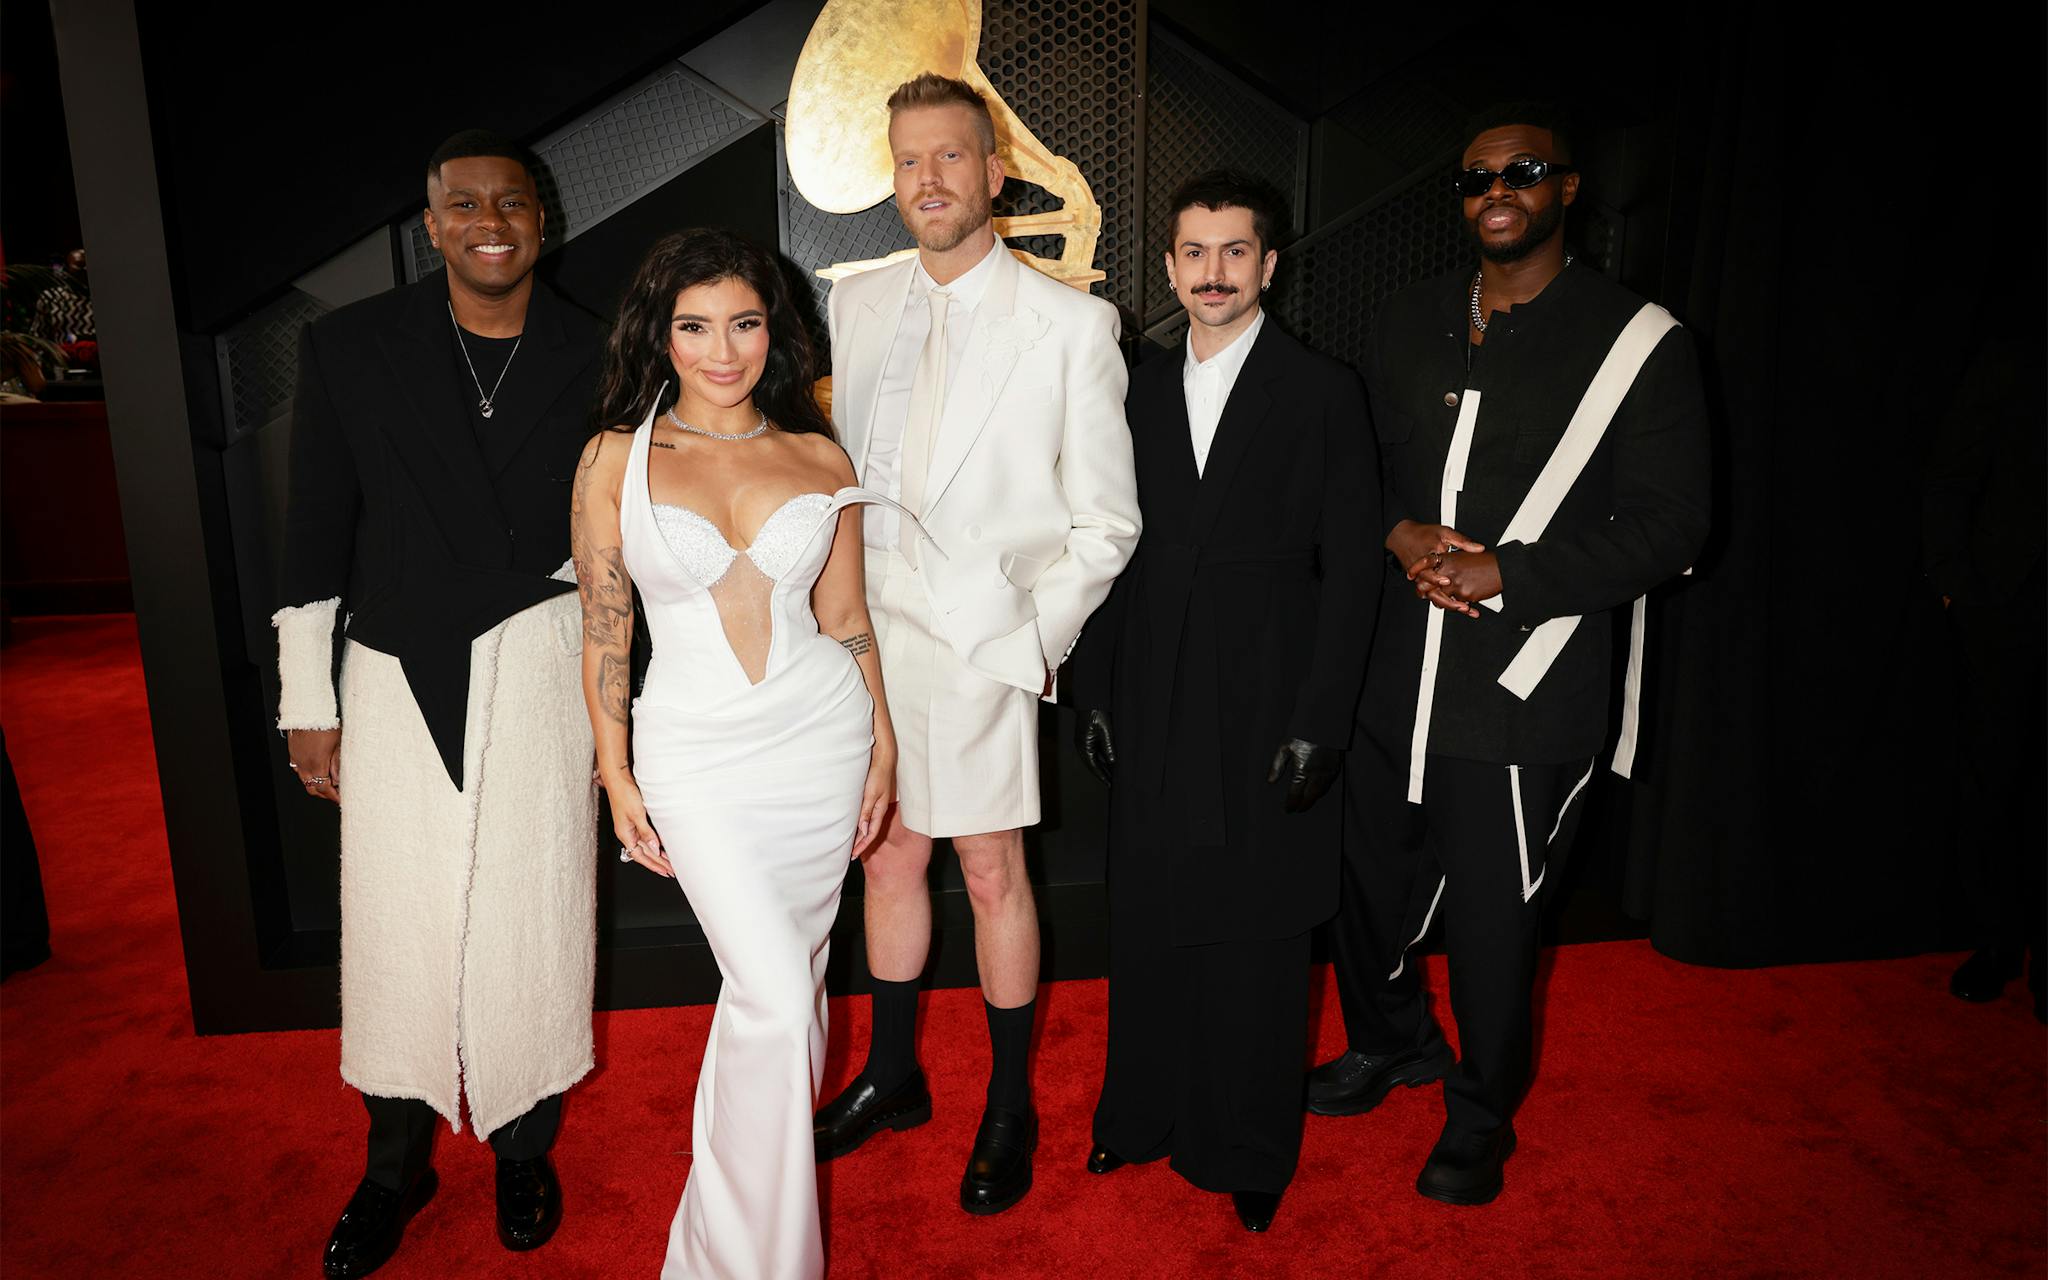 Pentatonix lost their Grammy to Icelandic artist Laufey, but the group still had their moment, performing Prince’s “Let’s Go Crazy"  alongside Jordin Sparks, Sheila E., Jaye Ivy and Larkin Poe. While their outfits were a cohesive win, as usual, their red carpet looks were bold choices. Matt Sallee, in particular, was a standout with his look that gave “when you have a spa appointment at 2 pm but the red carpet at 5 pm” with his black and white tuxedo-robe hybrid. 